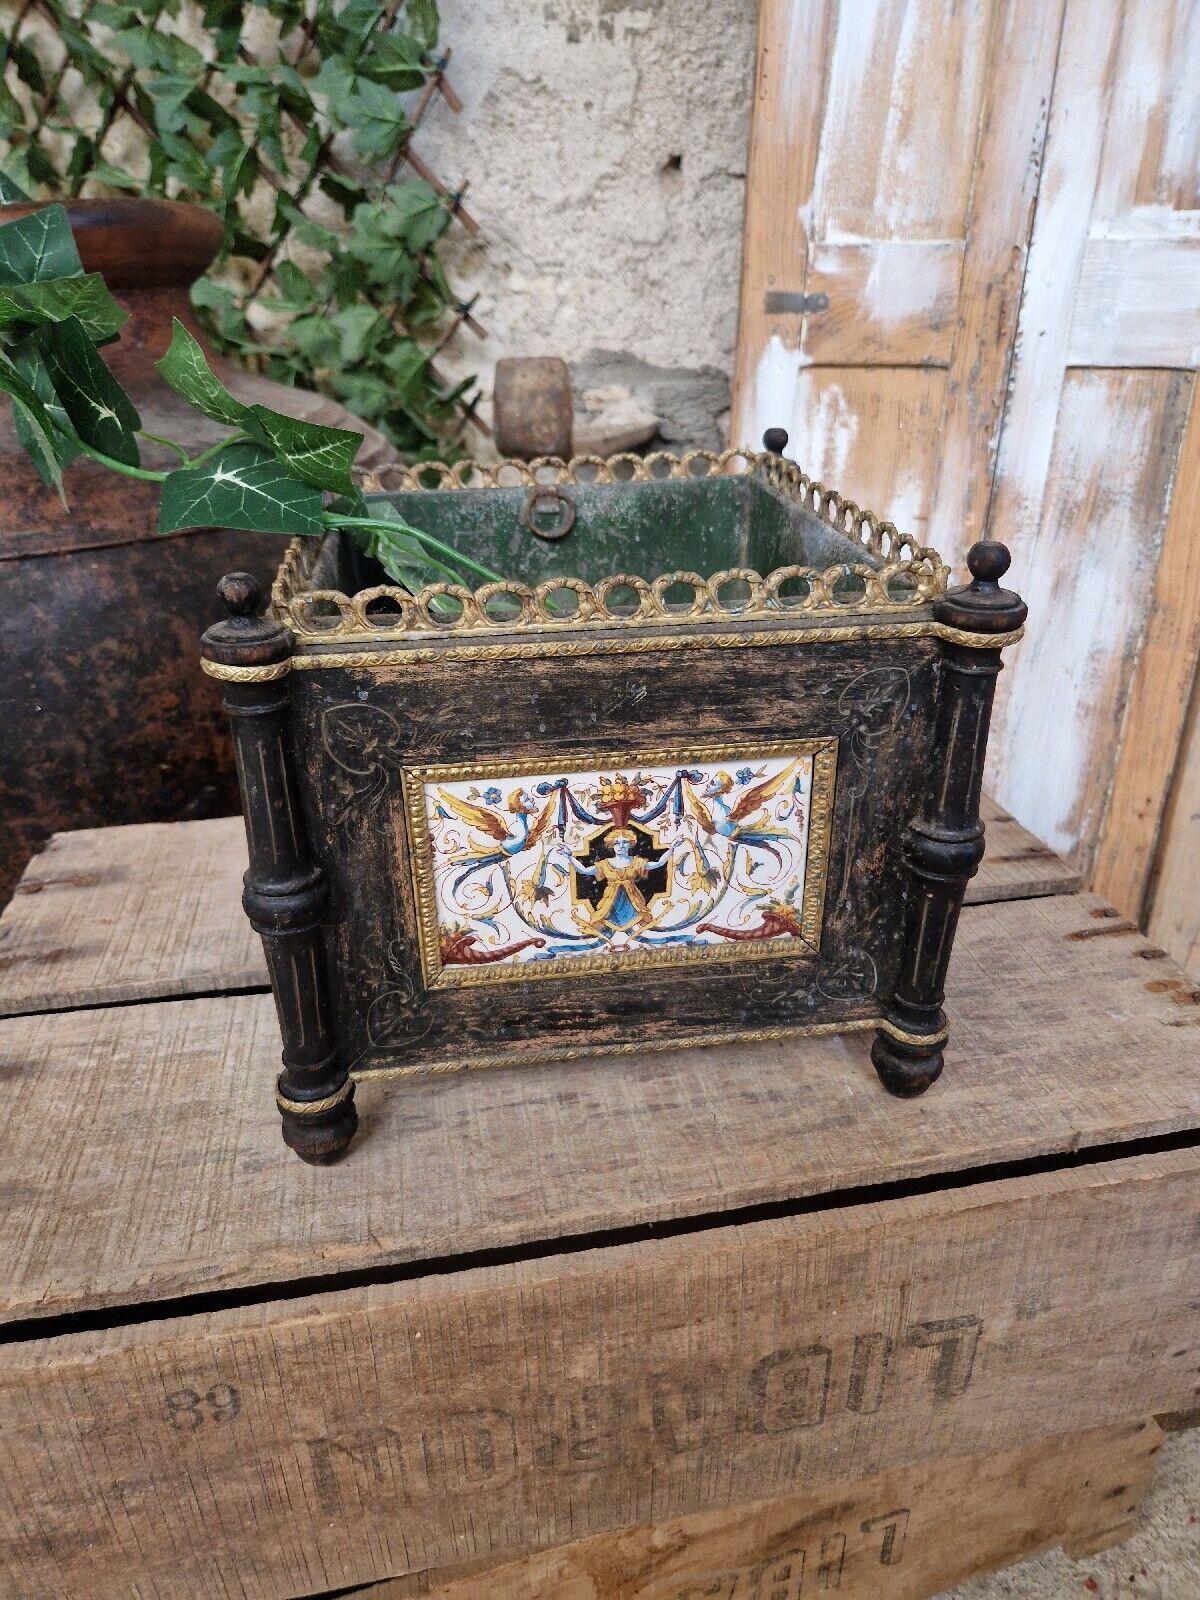 This exquisite 19th-century French planter is a true testament to the timeless beauty of antique craftsmanship. The piece boasts a stunning ebonised black wood finish that is sure to complement any décor. Its sturdy wooden construction guarantees it